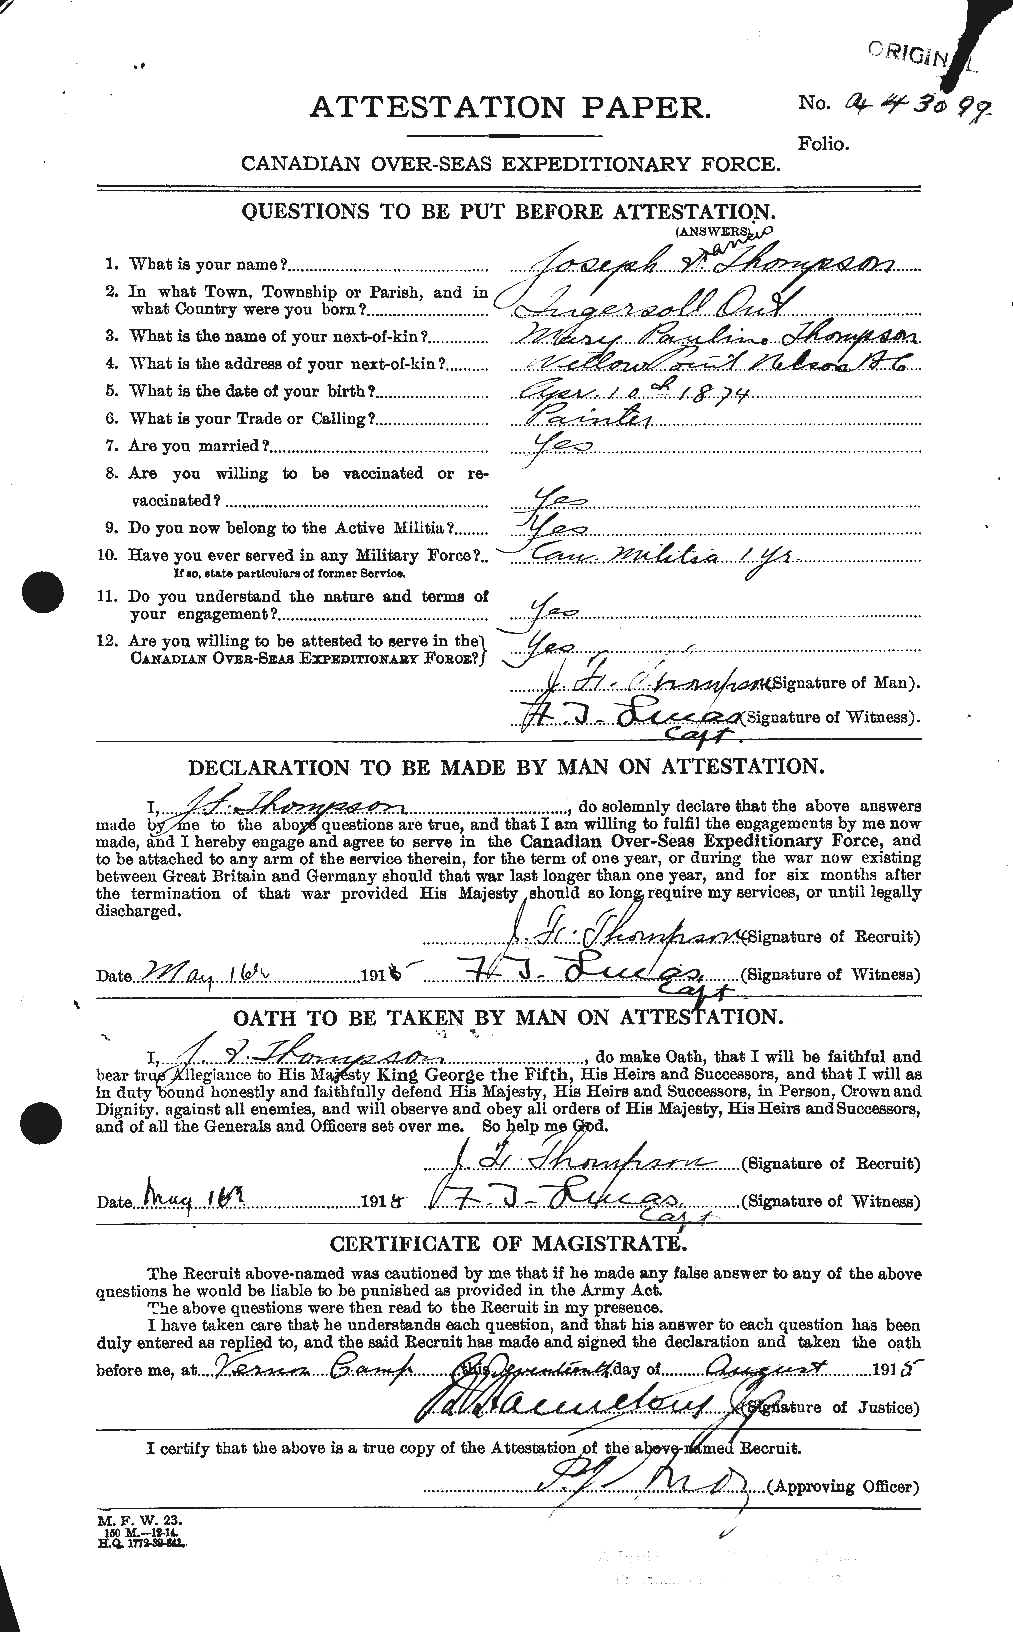 Personnel Records of the First World War - CEF 630649a